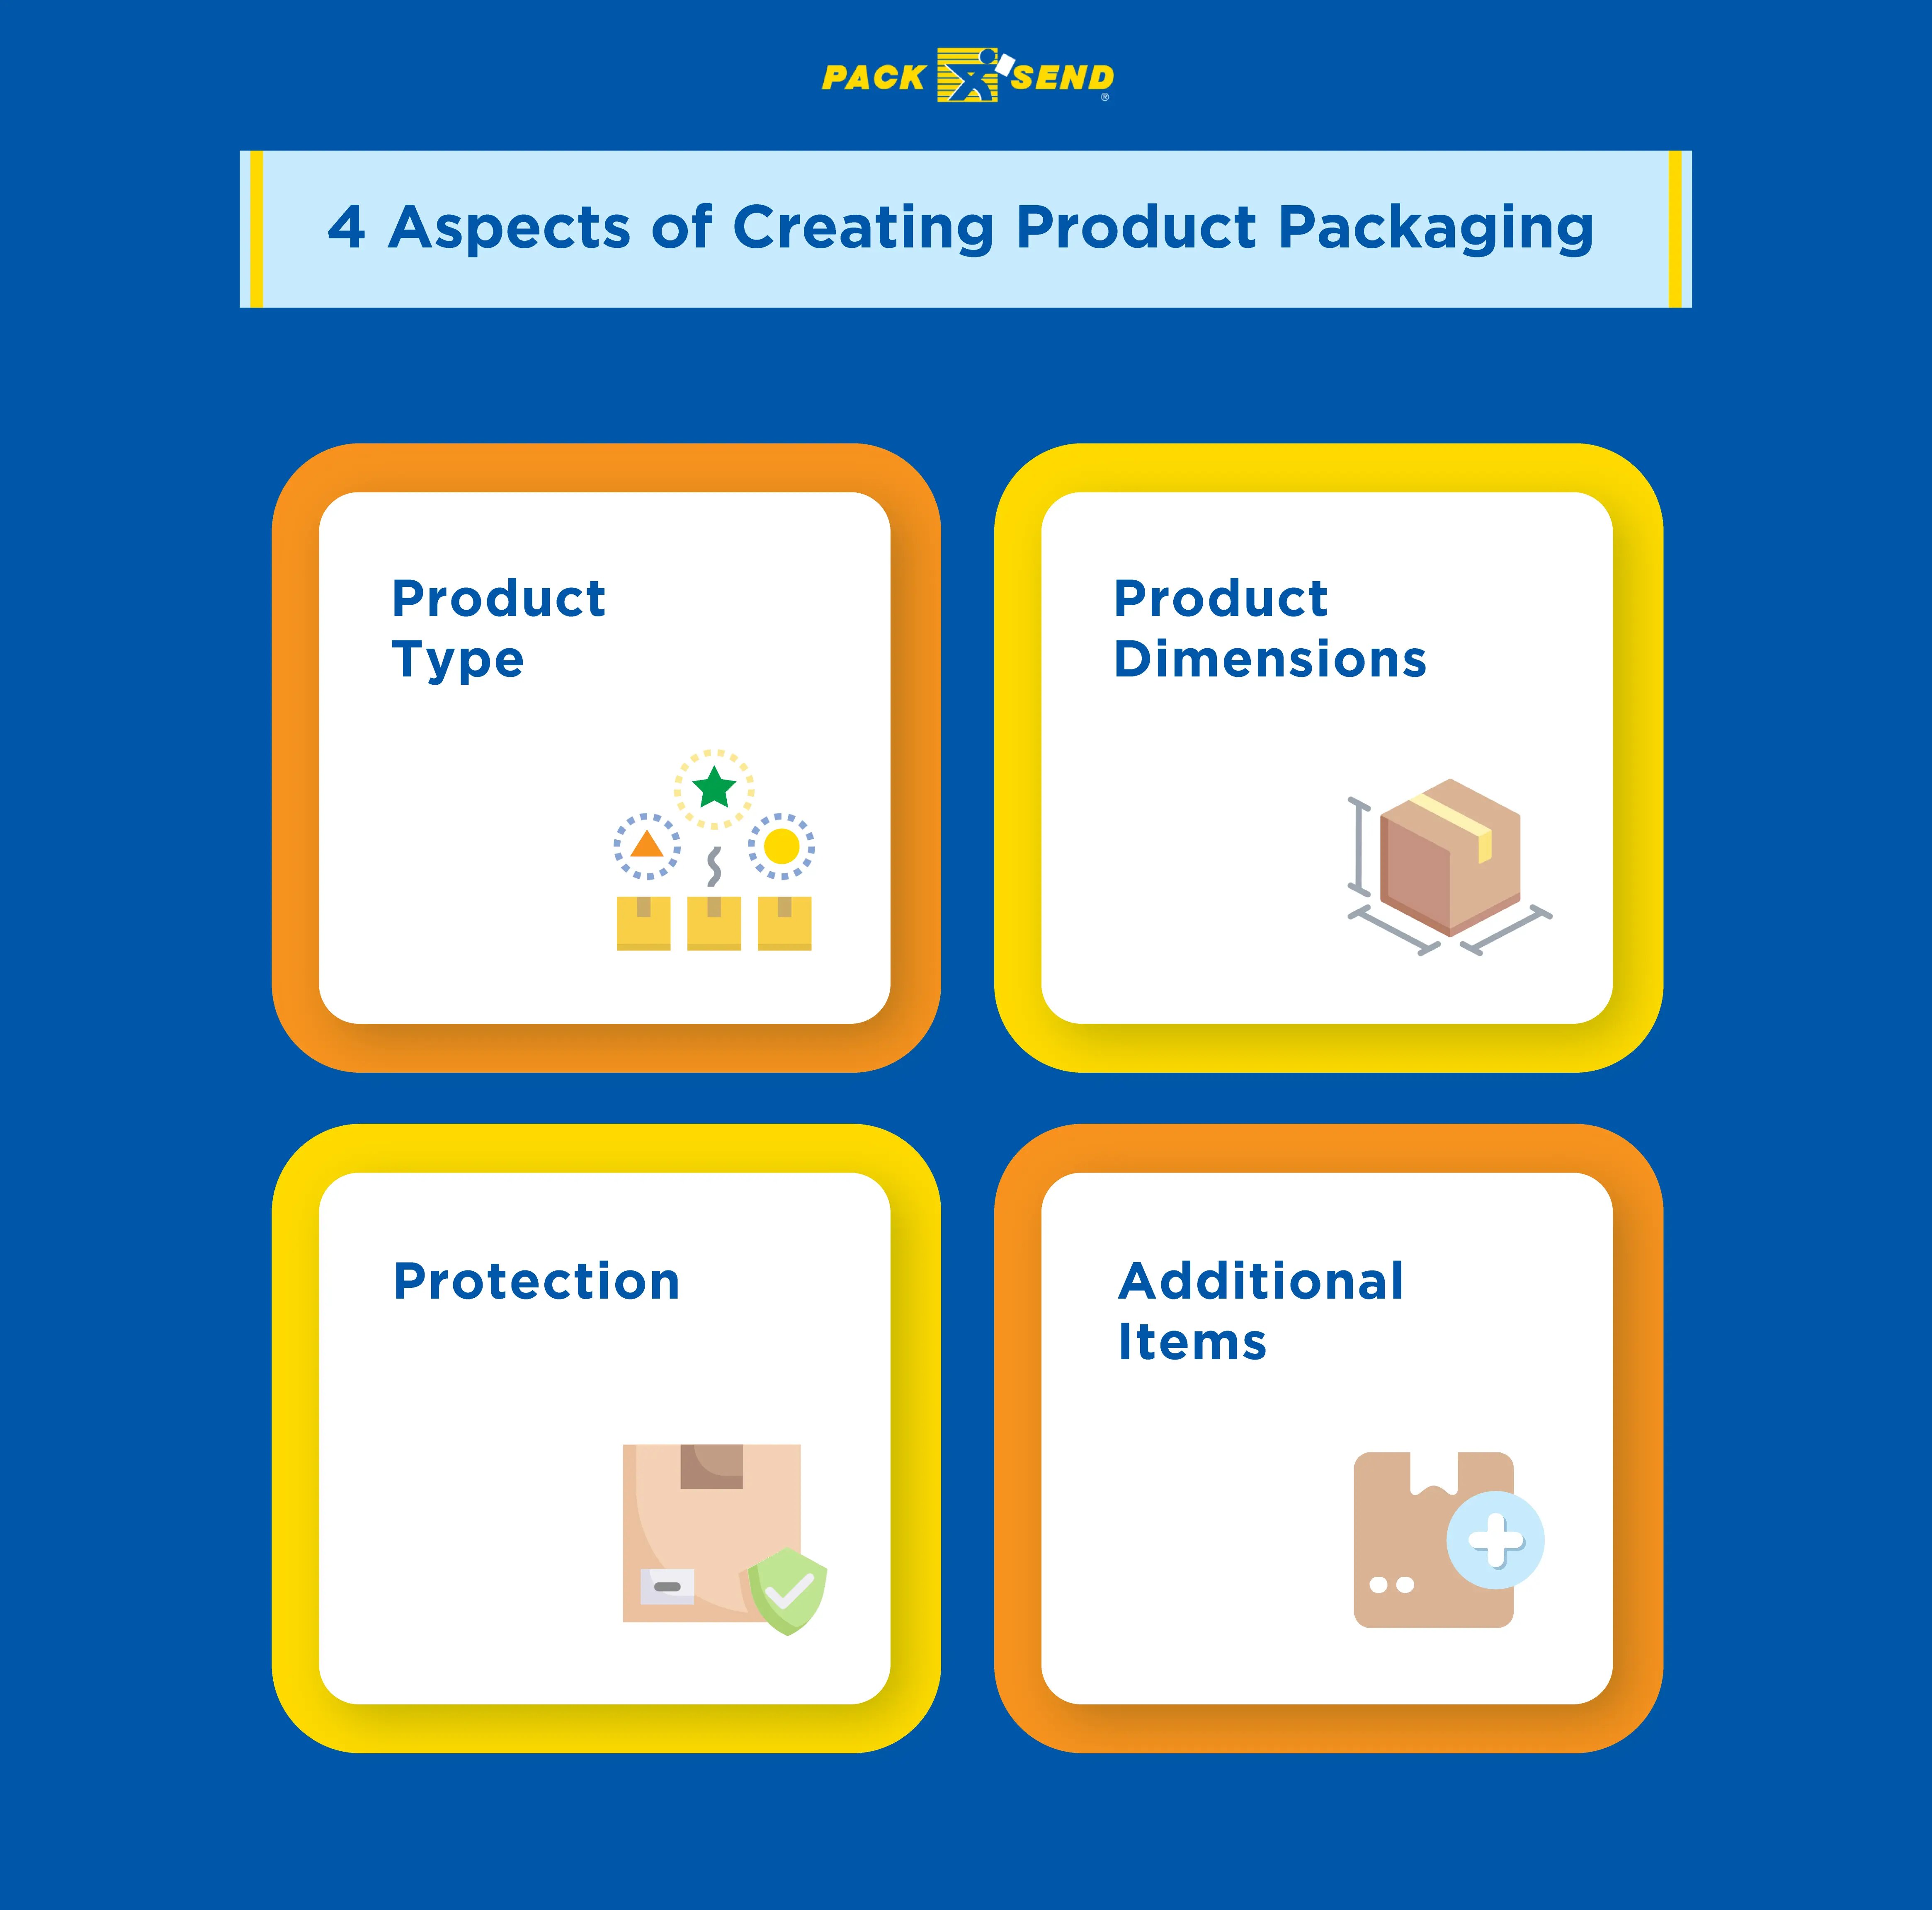 Aspects-of-Creating-Product-Packaging